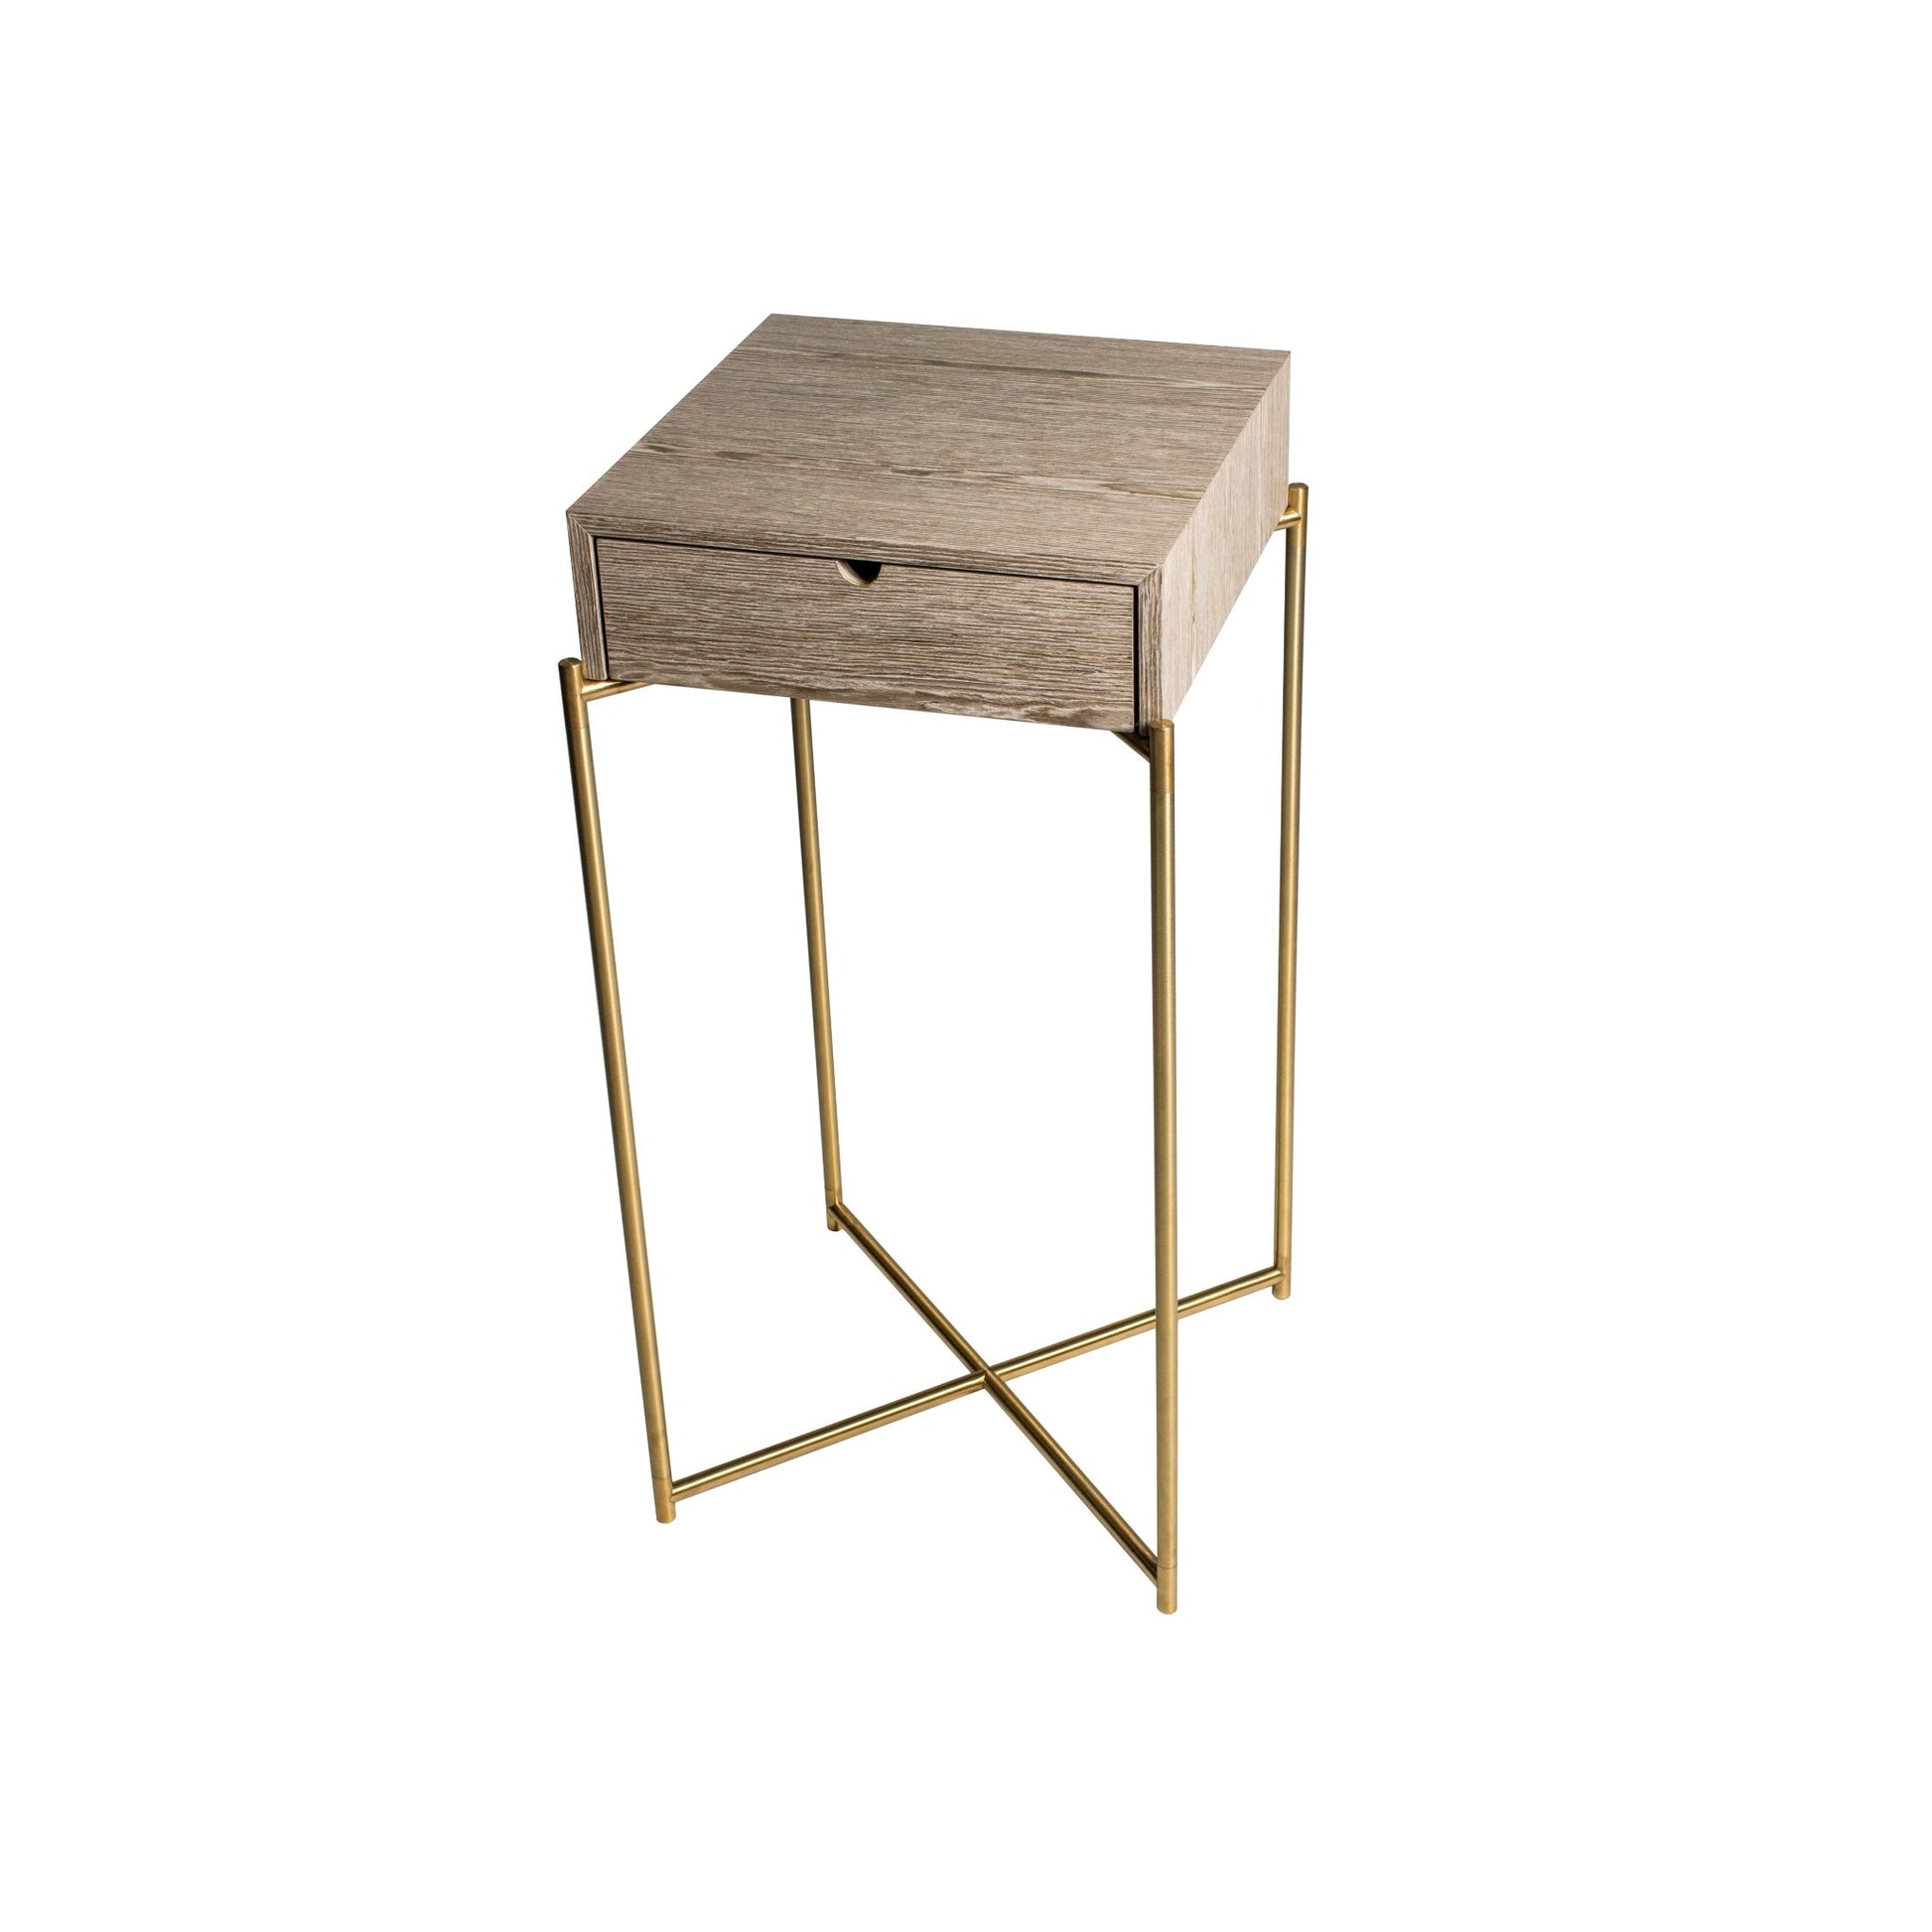 Iris Square Plant Stand With Drawer - Weathered Oak Drawer Top & Brass Frame